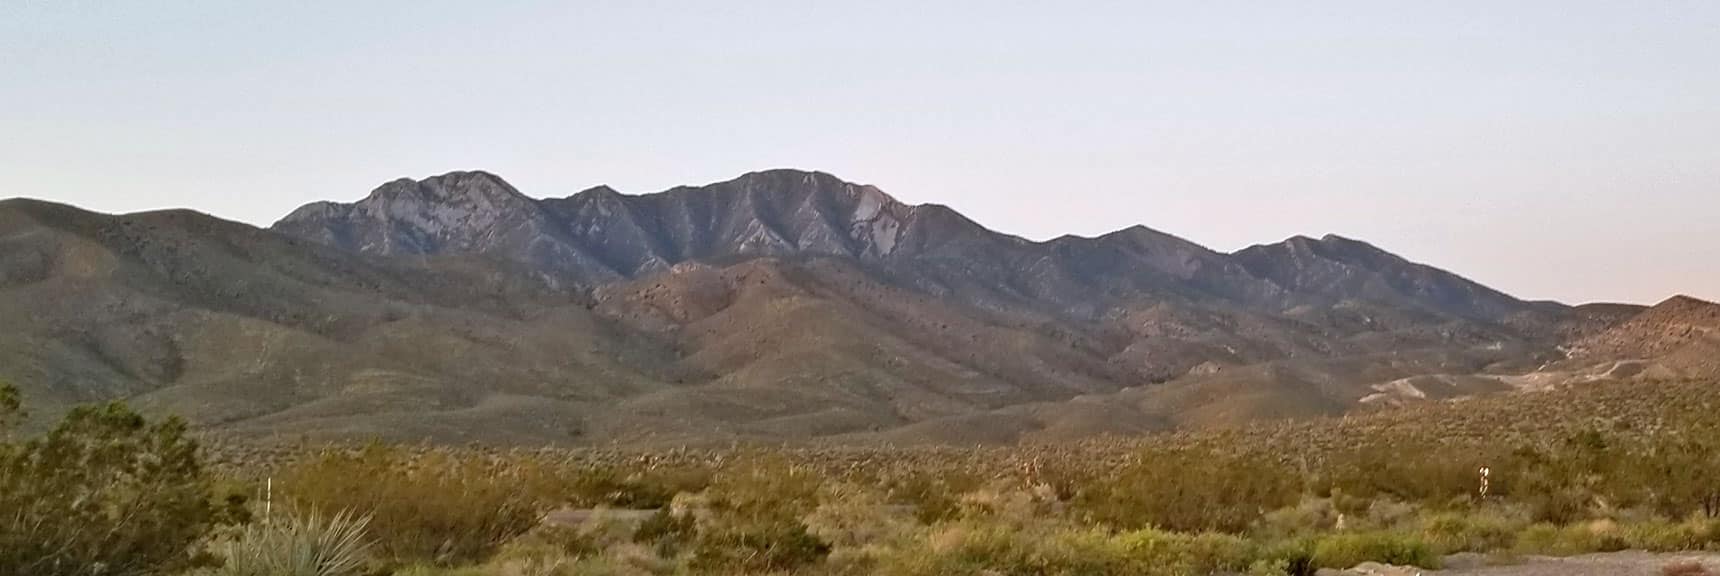 Morning View on the Way to El Padre Mountain, La Madre Mountains Wilderness, Nevada